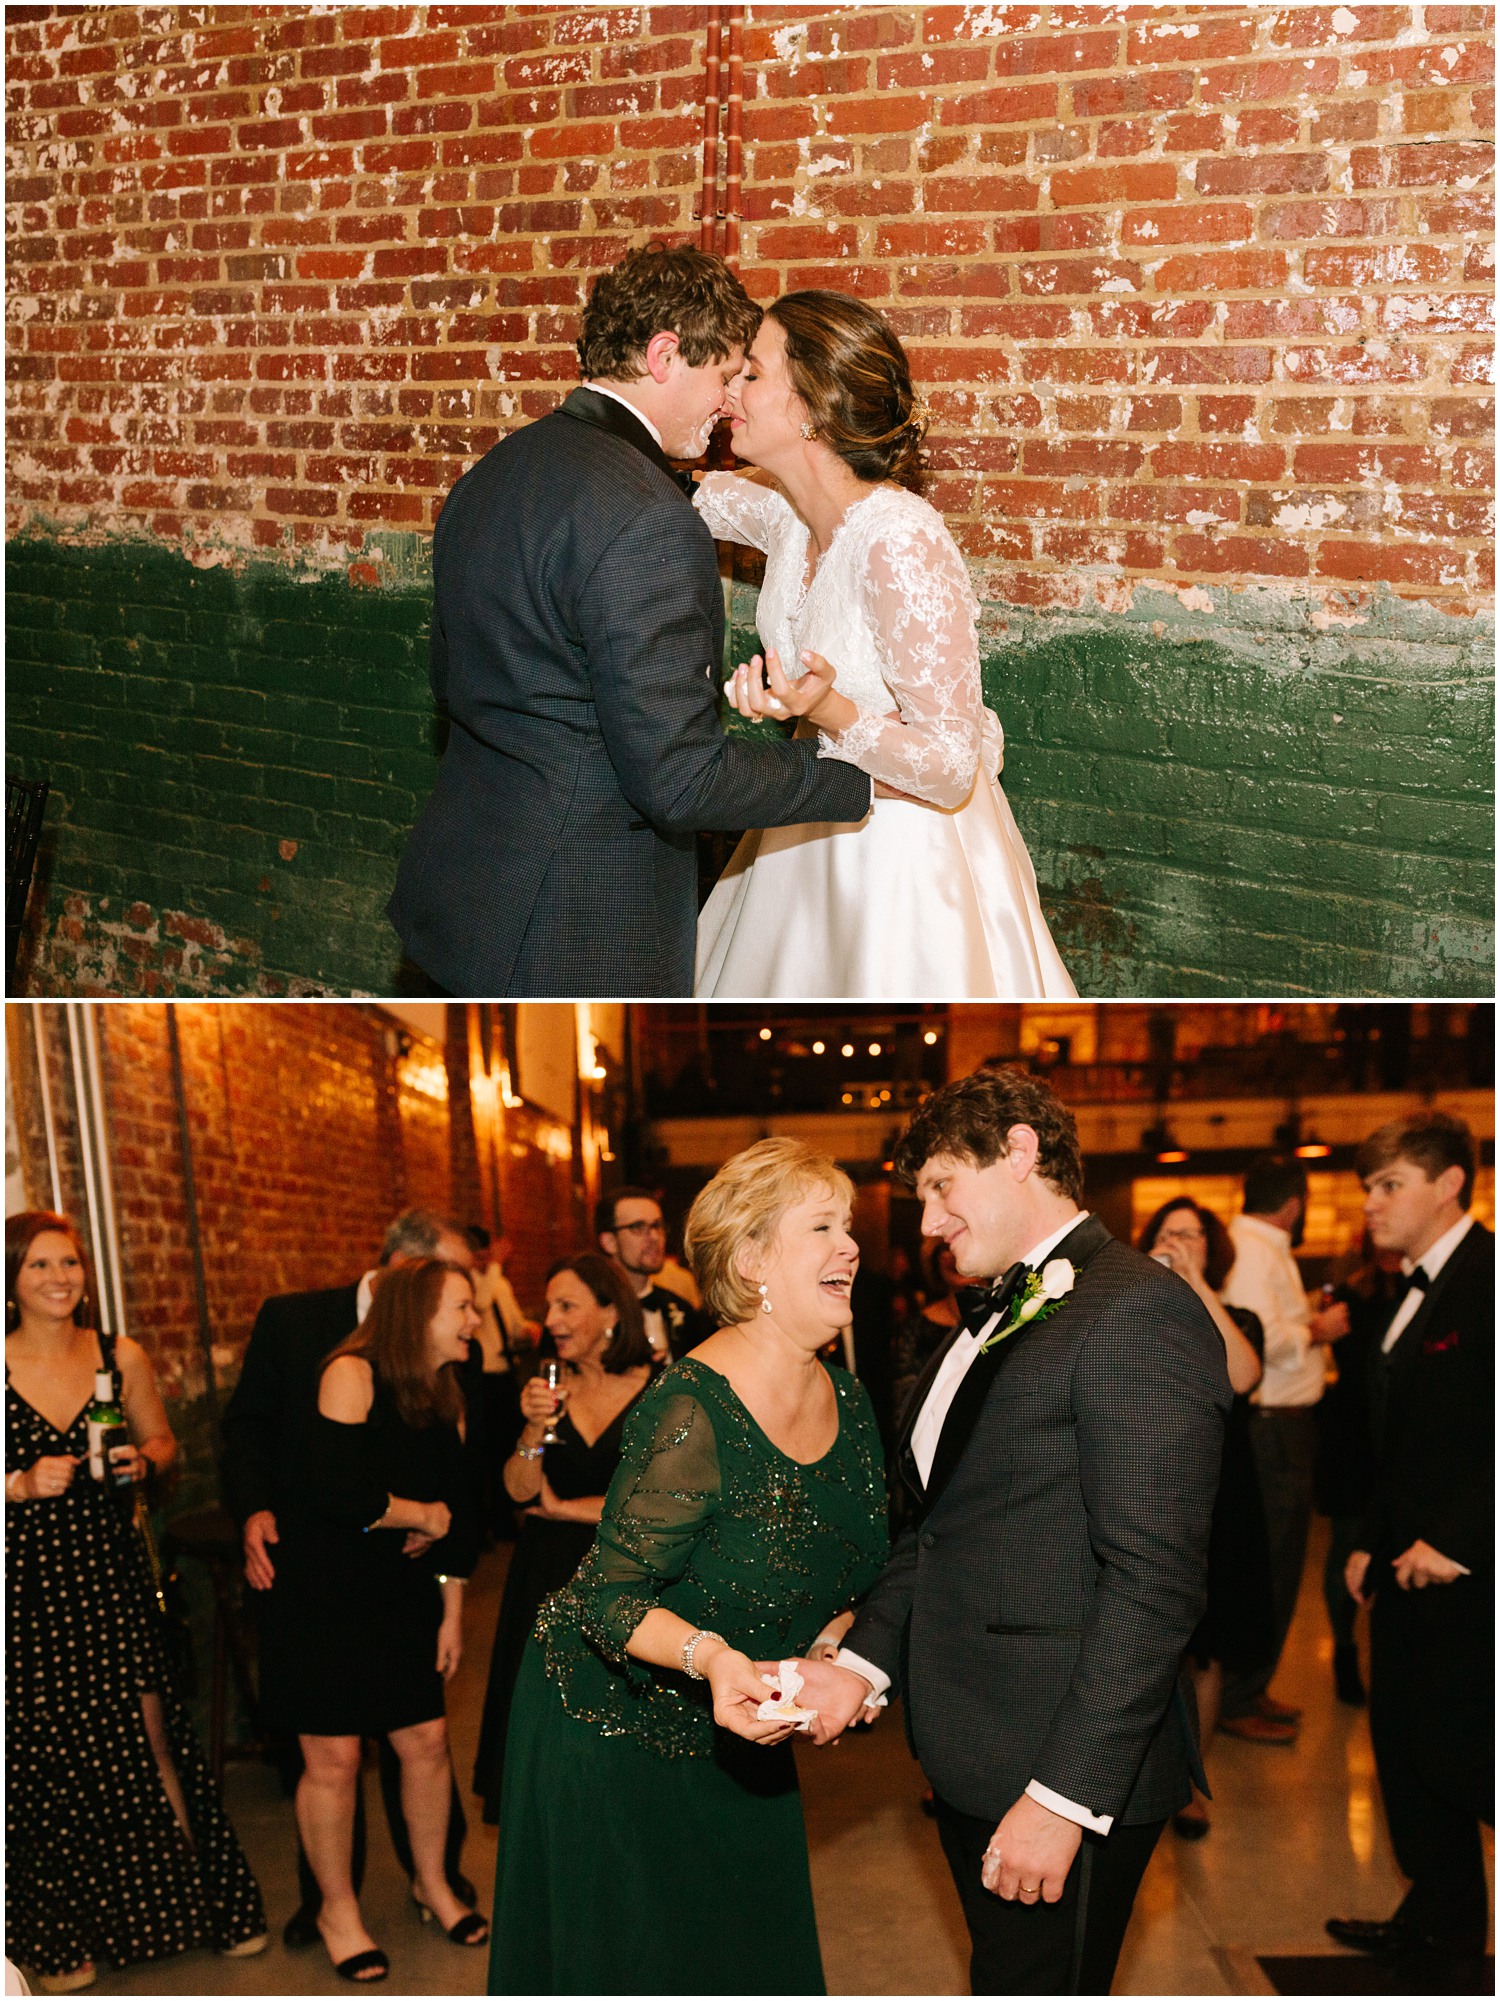 Cadillac Service Garage wedding reception moments photographed by Chelsea Renay Photography